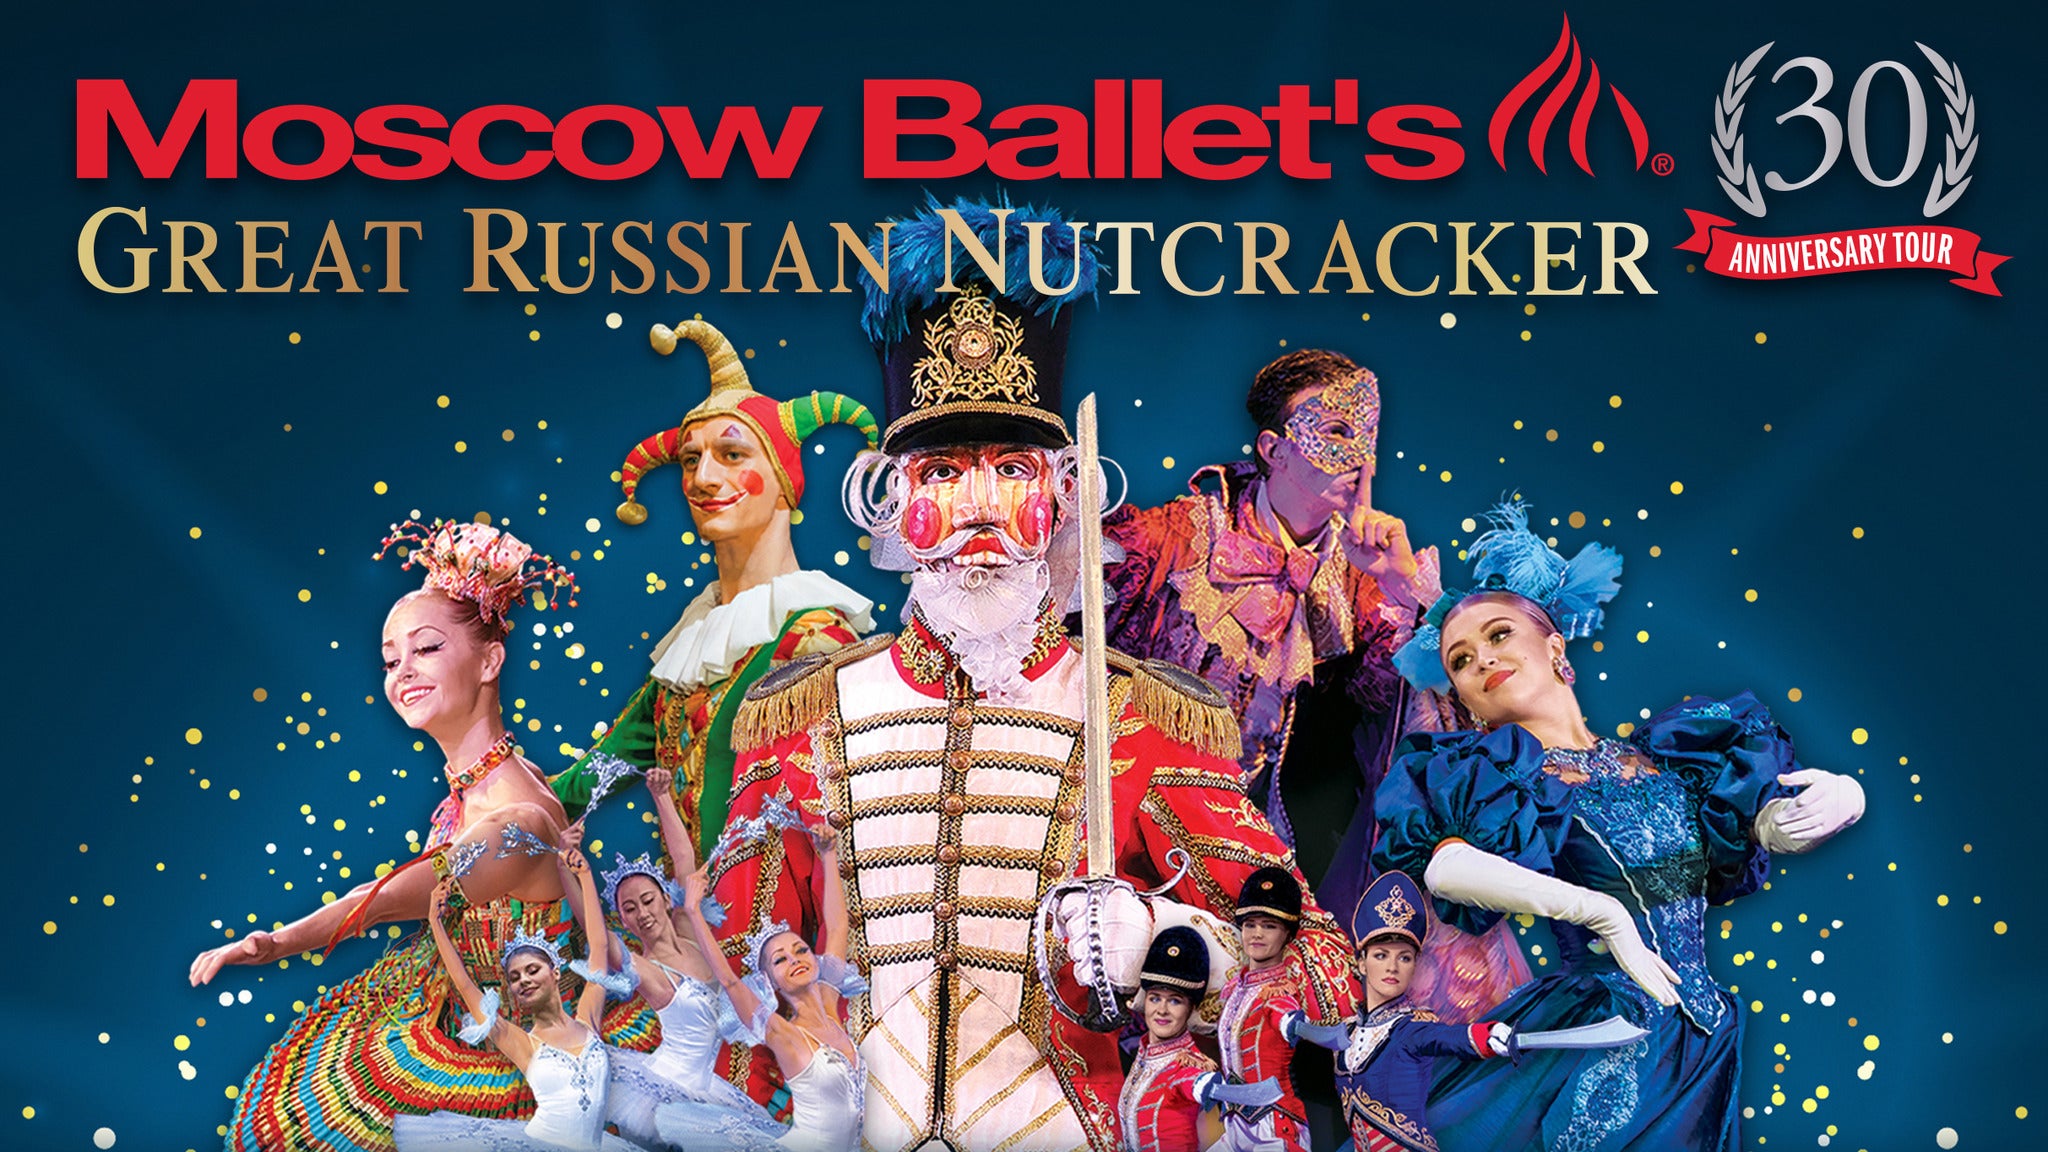 Moscow Ballet's Great Russian Nutcracker at Orpheum Theatre